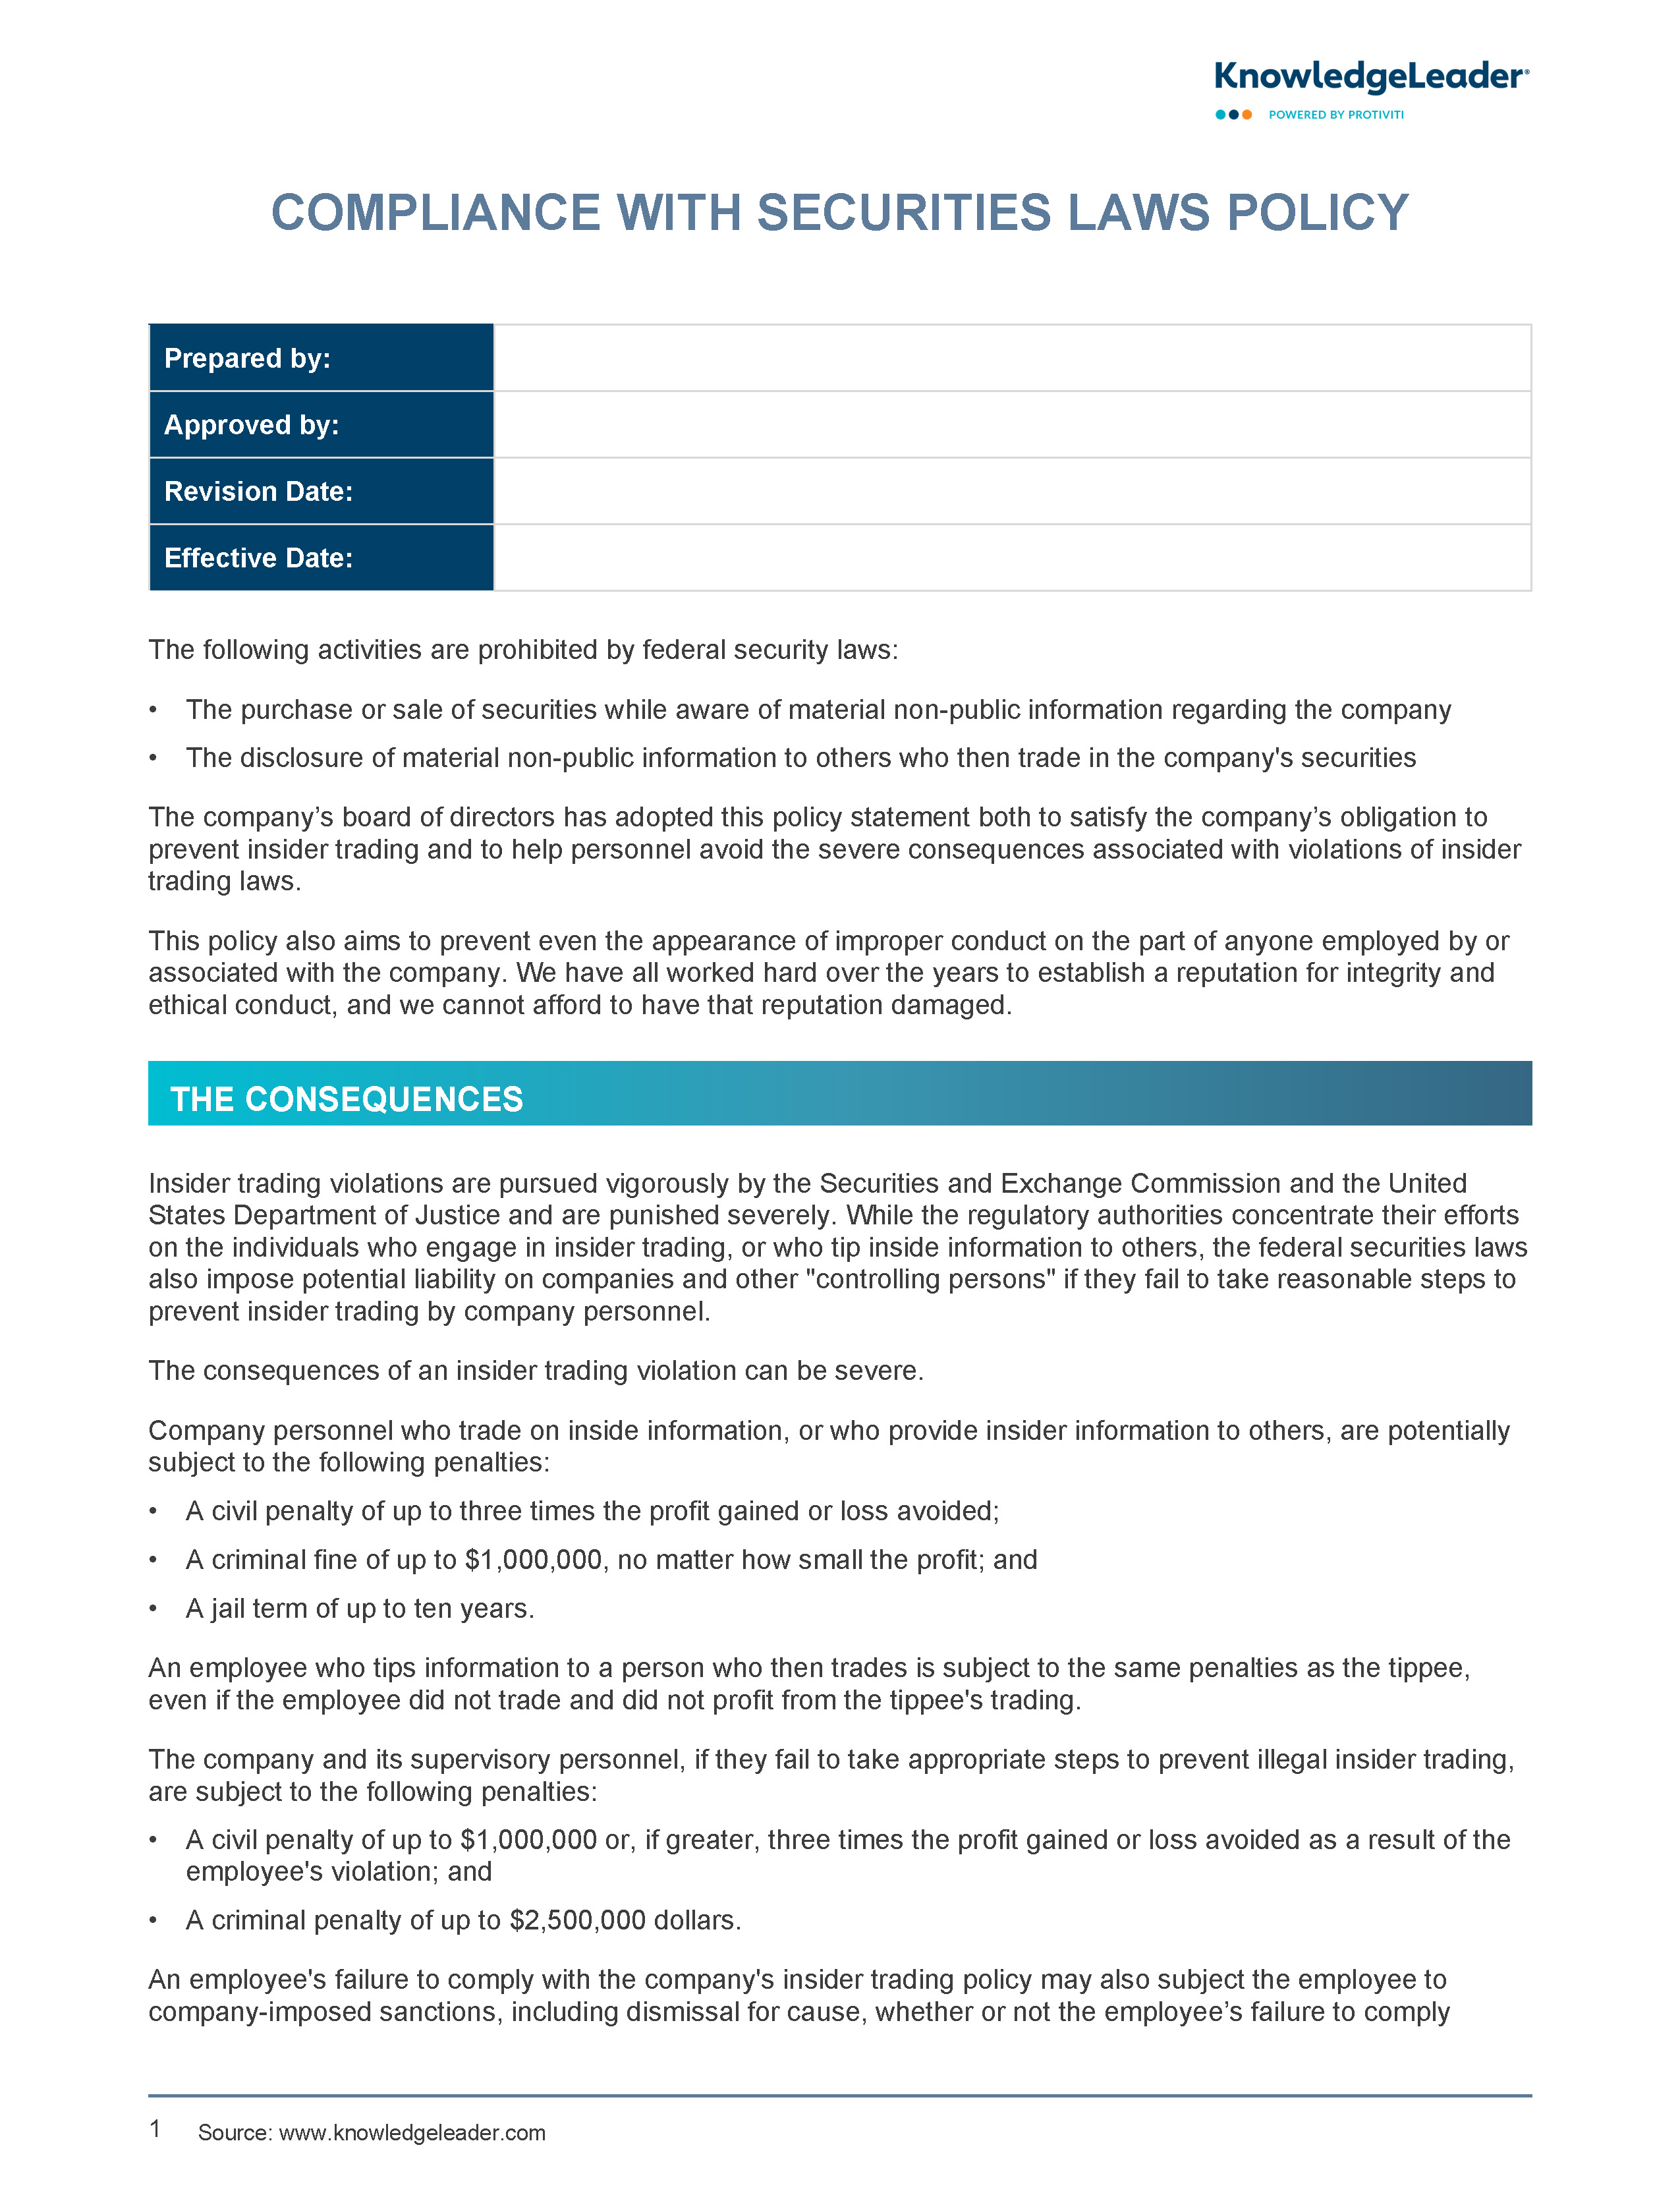 Screenshot of the first page of Compliance with Security Laws Policy